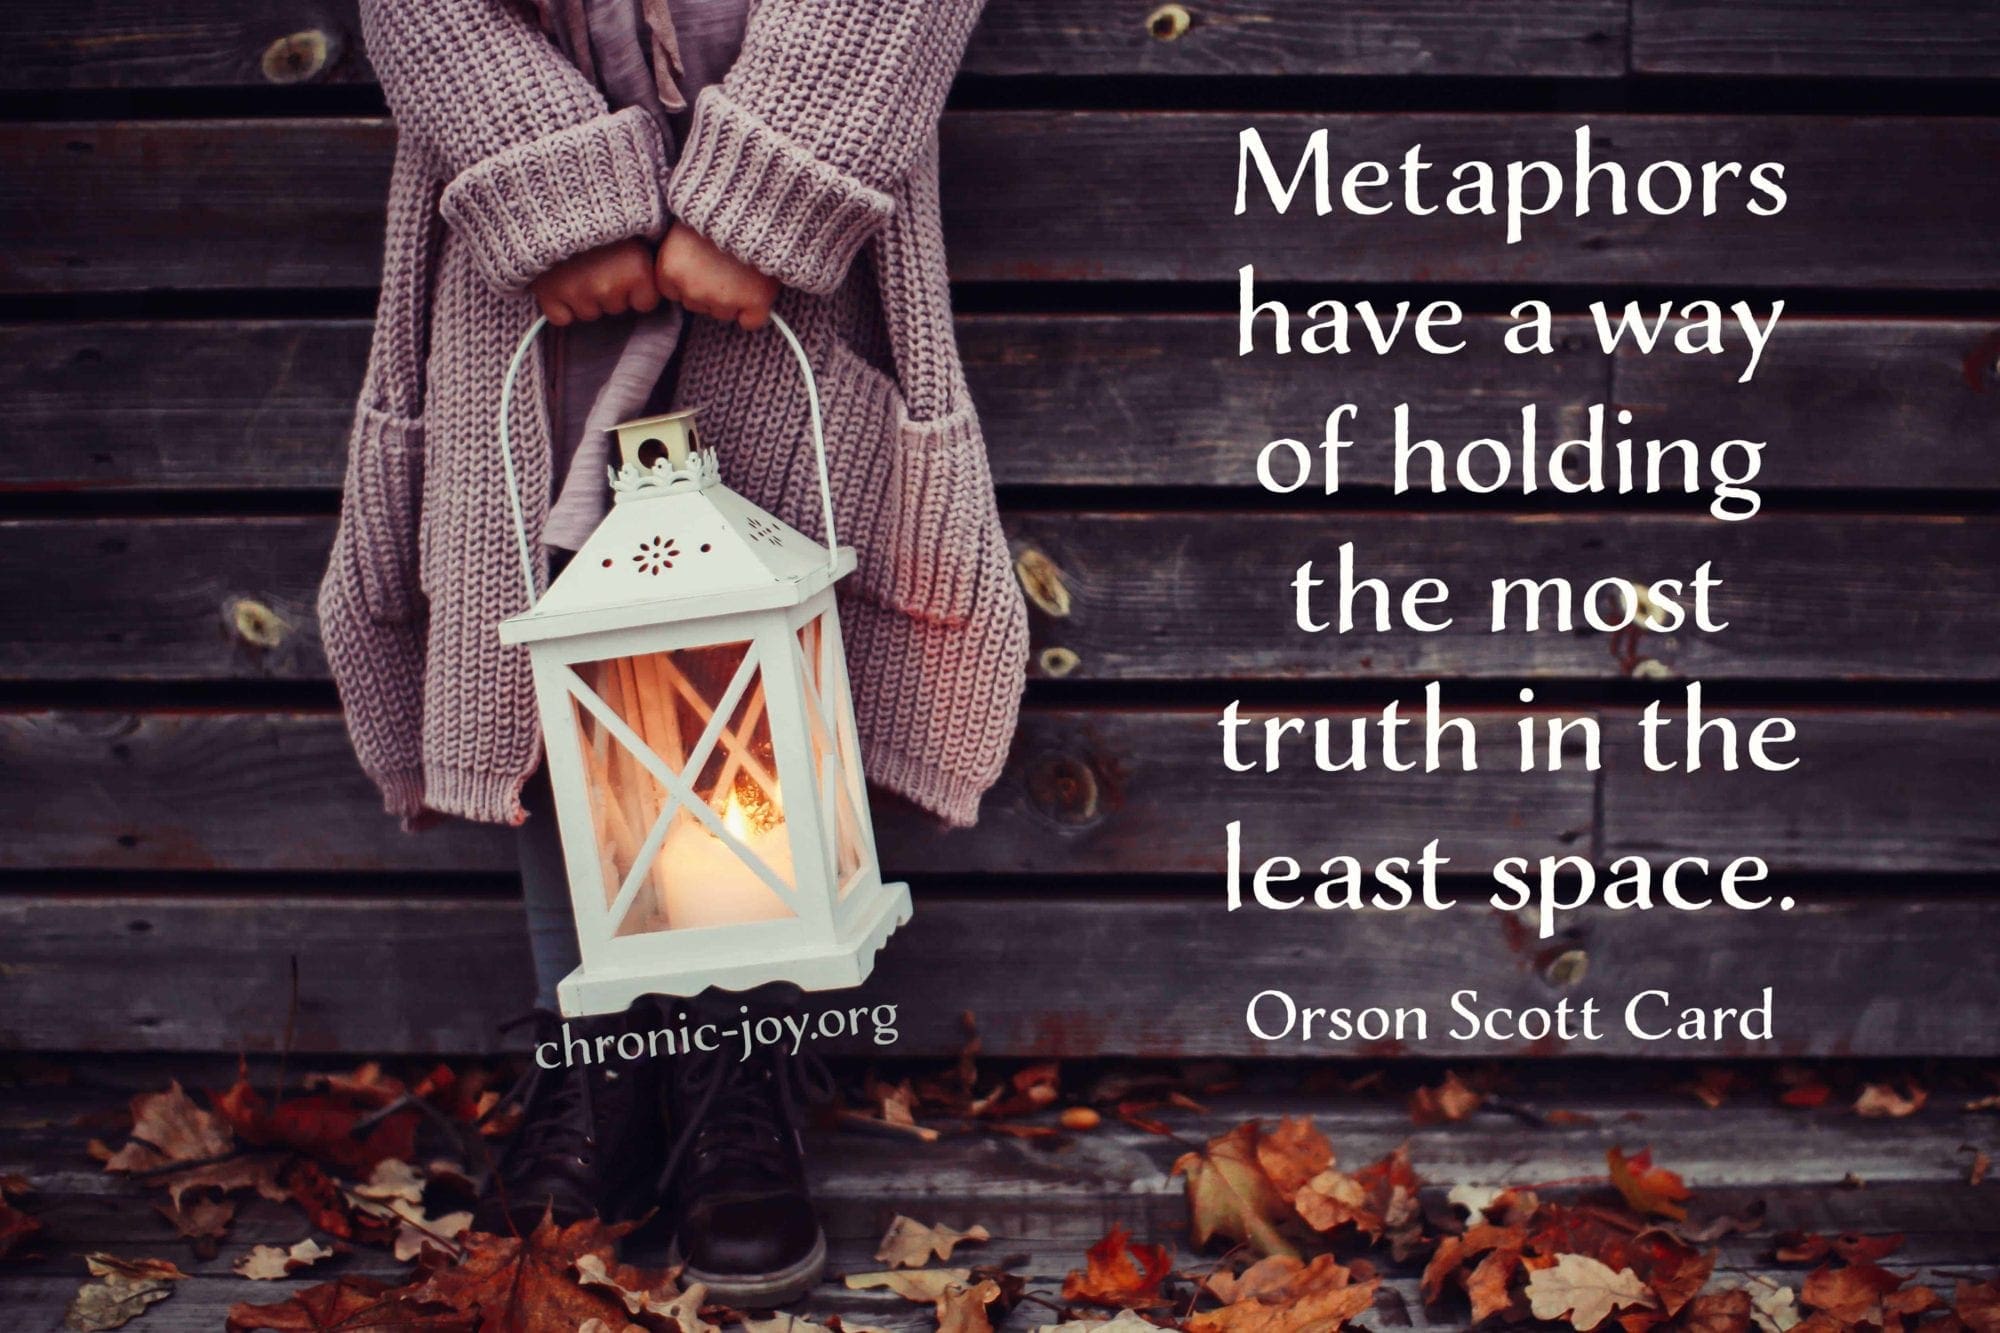 "Metaphors have a way of holding the most truth in the least space." Orson Scott Card